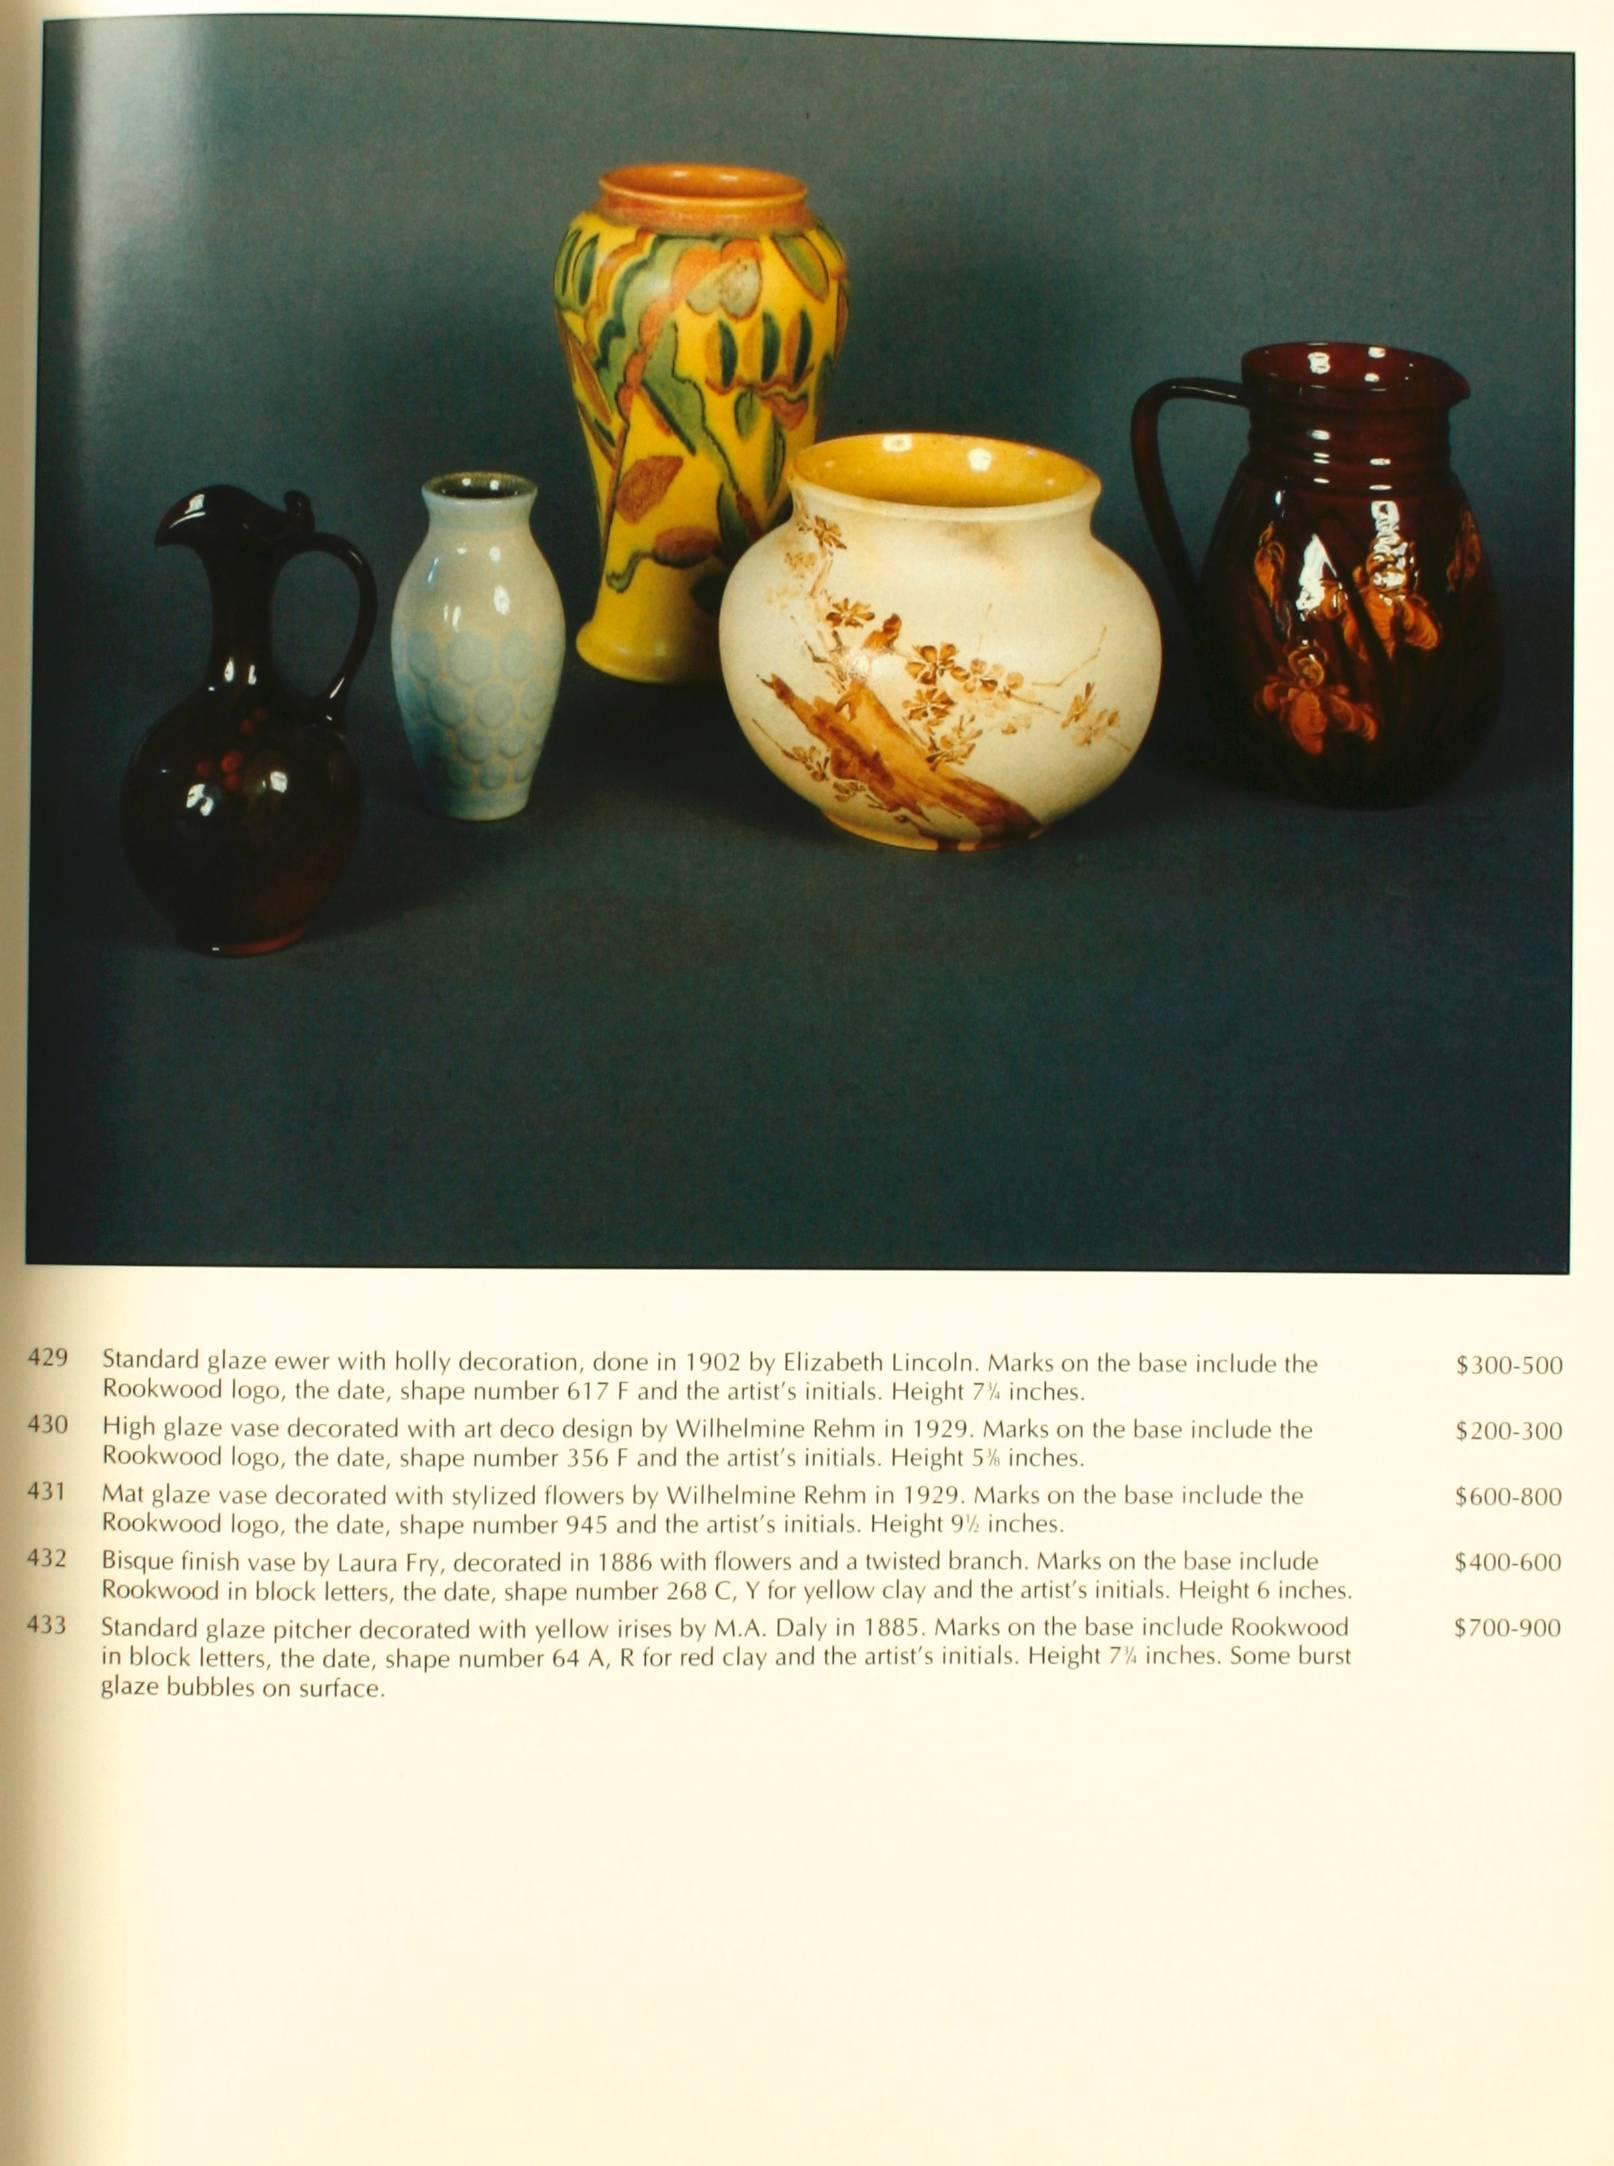 Glover collection: Rookwood pottery. Cincinnati: Cincinnati Art Galleries, 1993. 1st Ed paperback, unpaginated auction catalogue, featuring 1201 lots with over 250 color photographs of Rookwood Pottery with details of each; lists of factories,